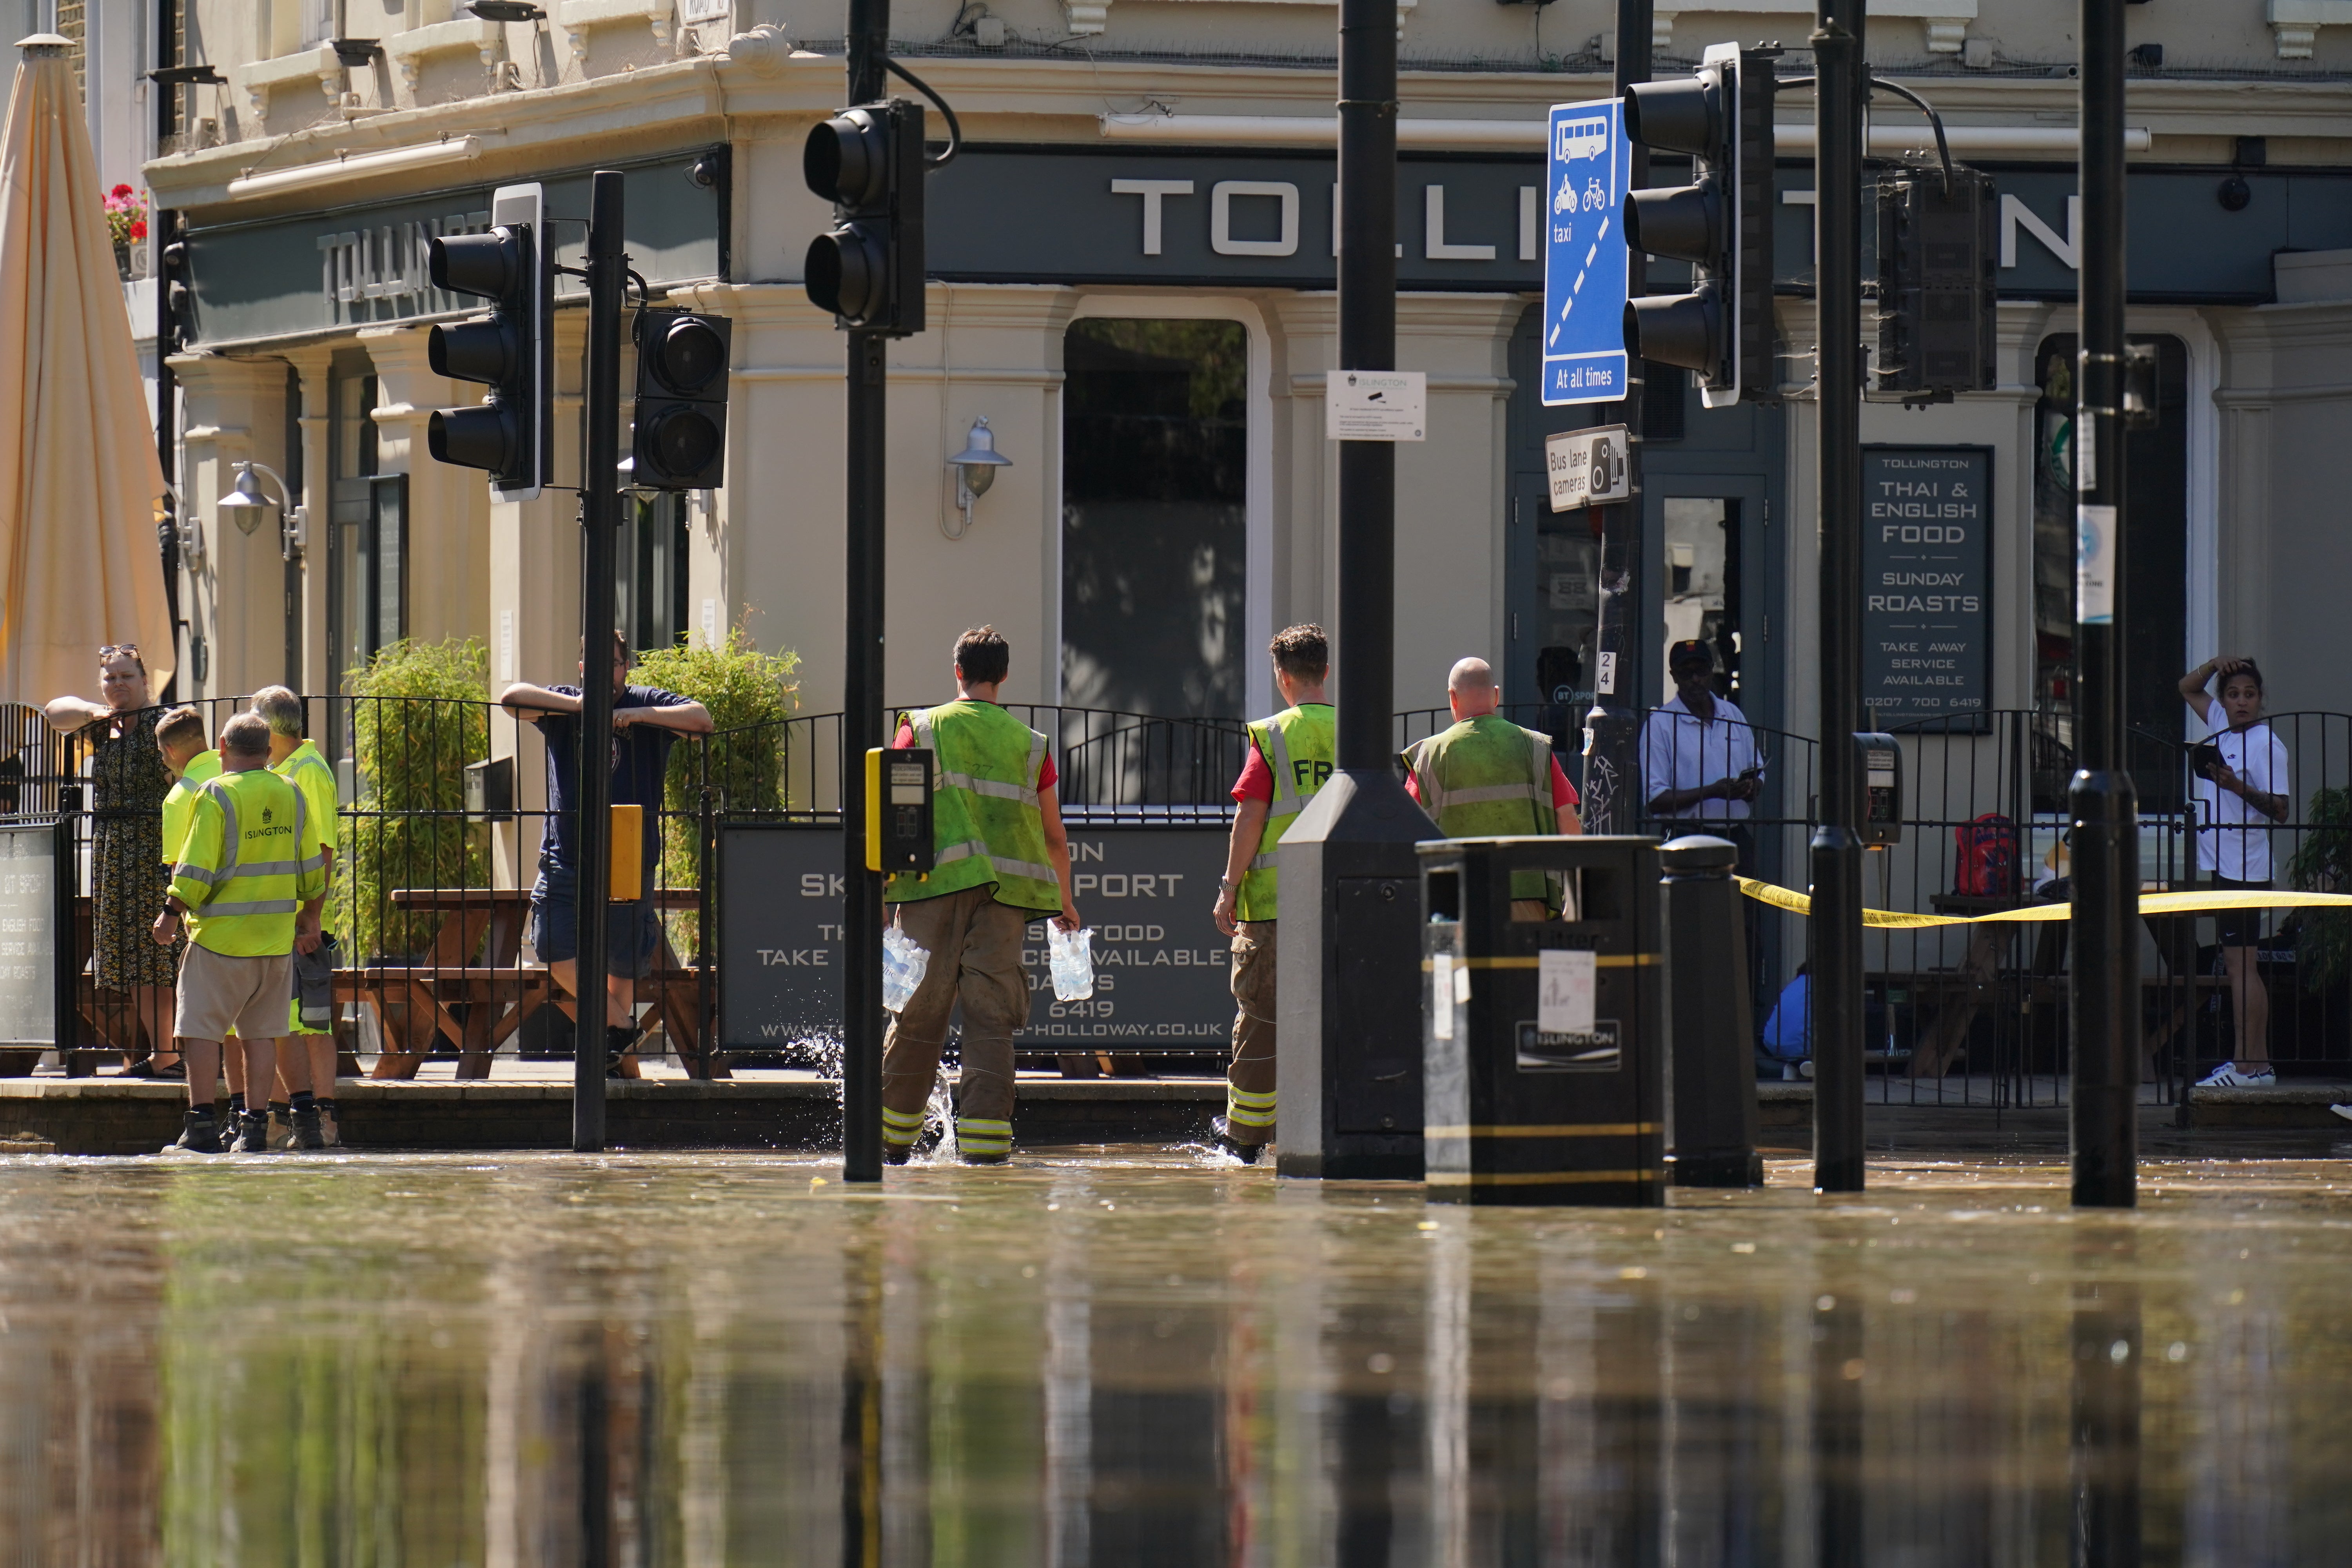 The scene outside the Tollington Arms in Holloway, north London, after a 36-inch water main burst, causing flooding up to four feet deep (Jonathan Brady/PA)